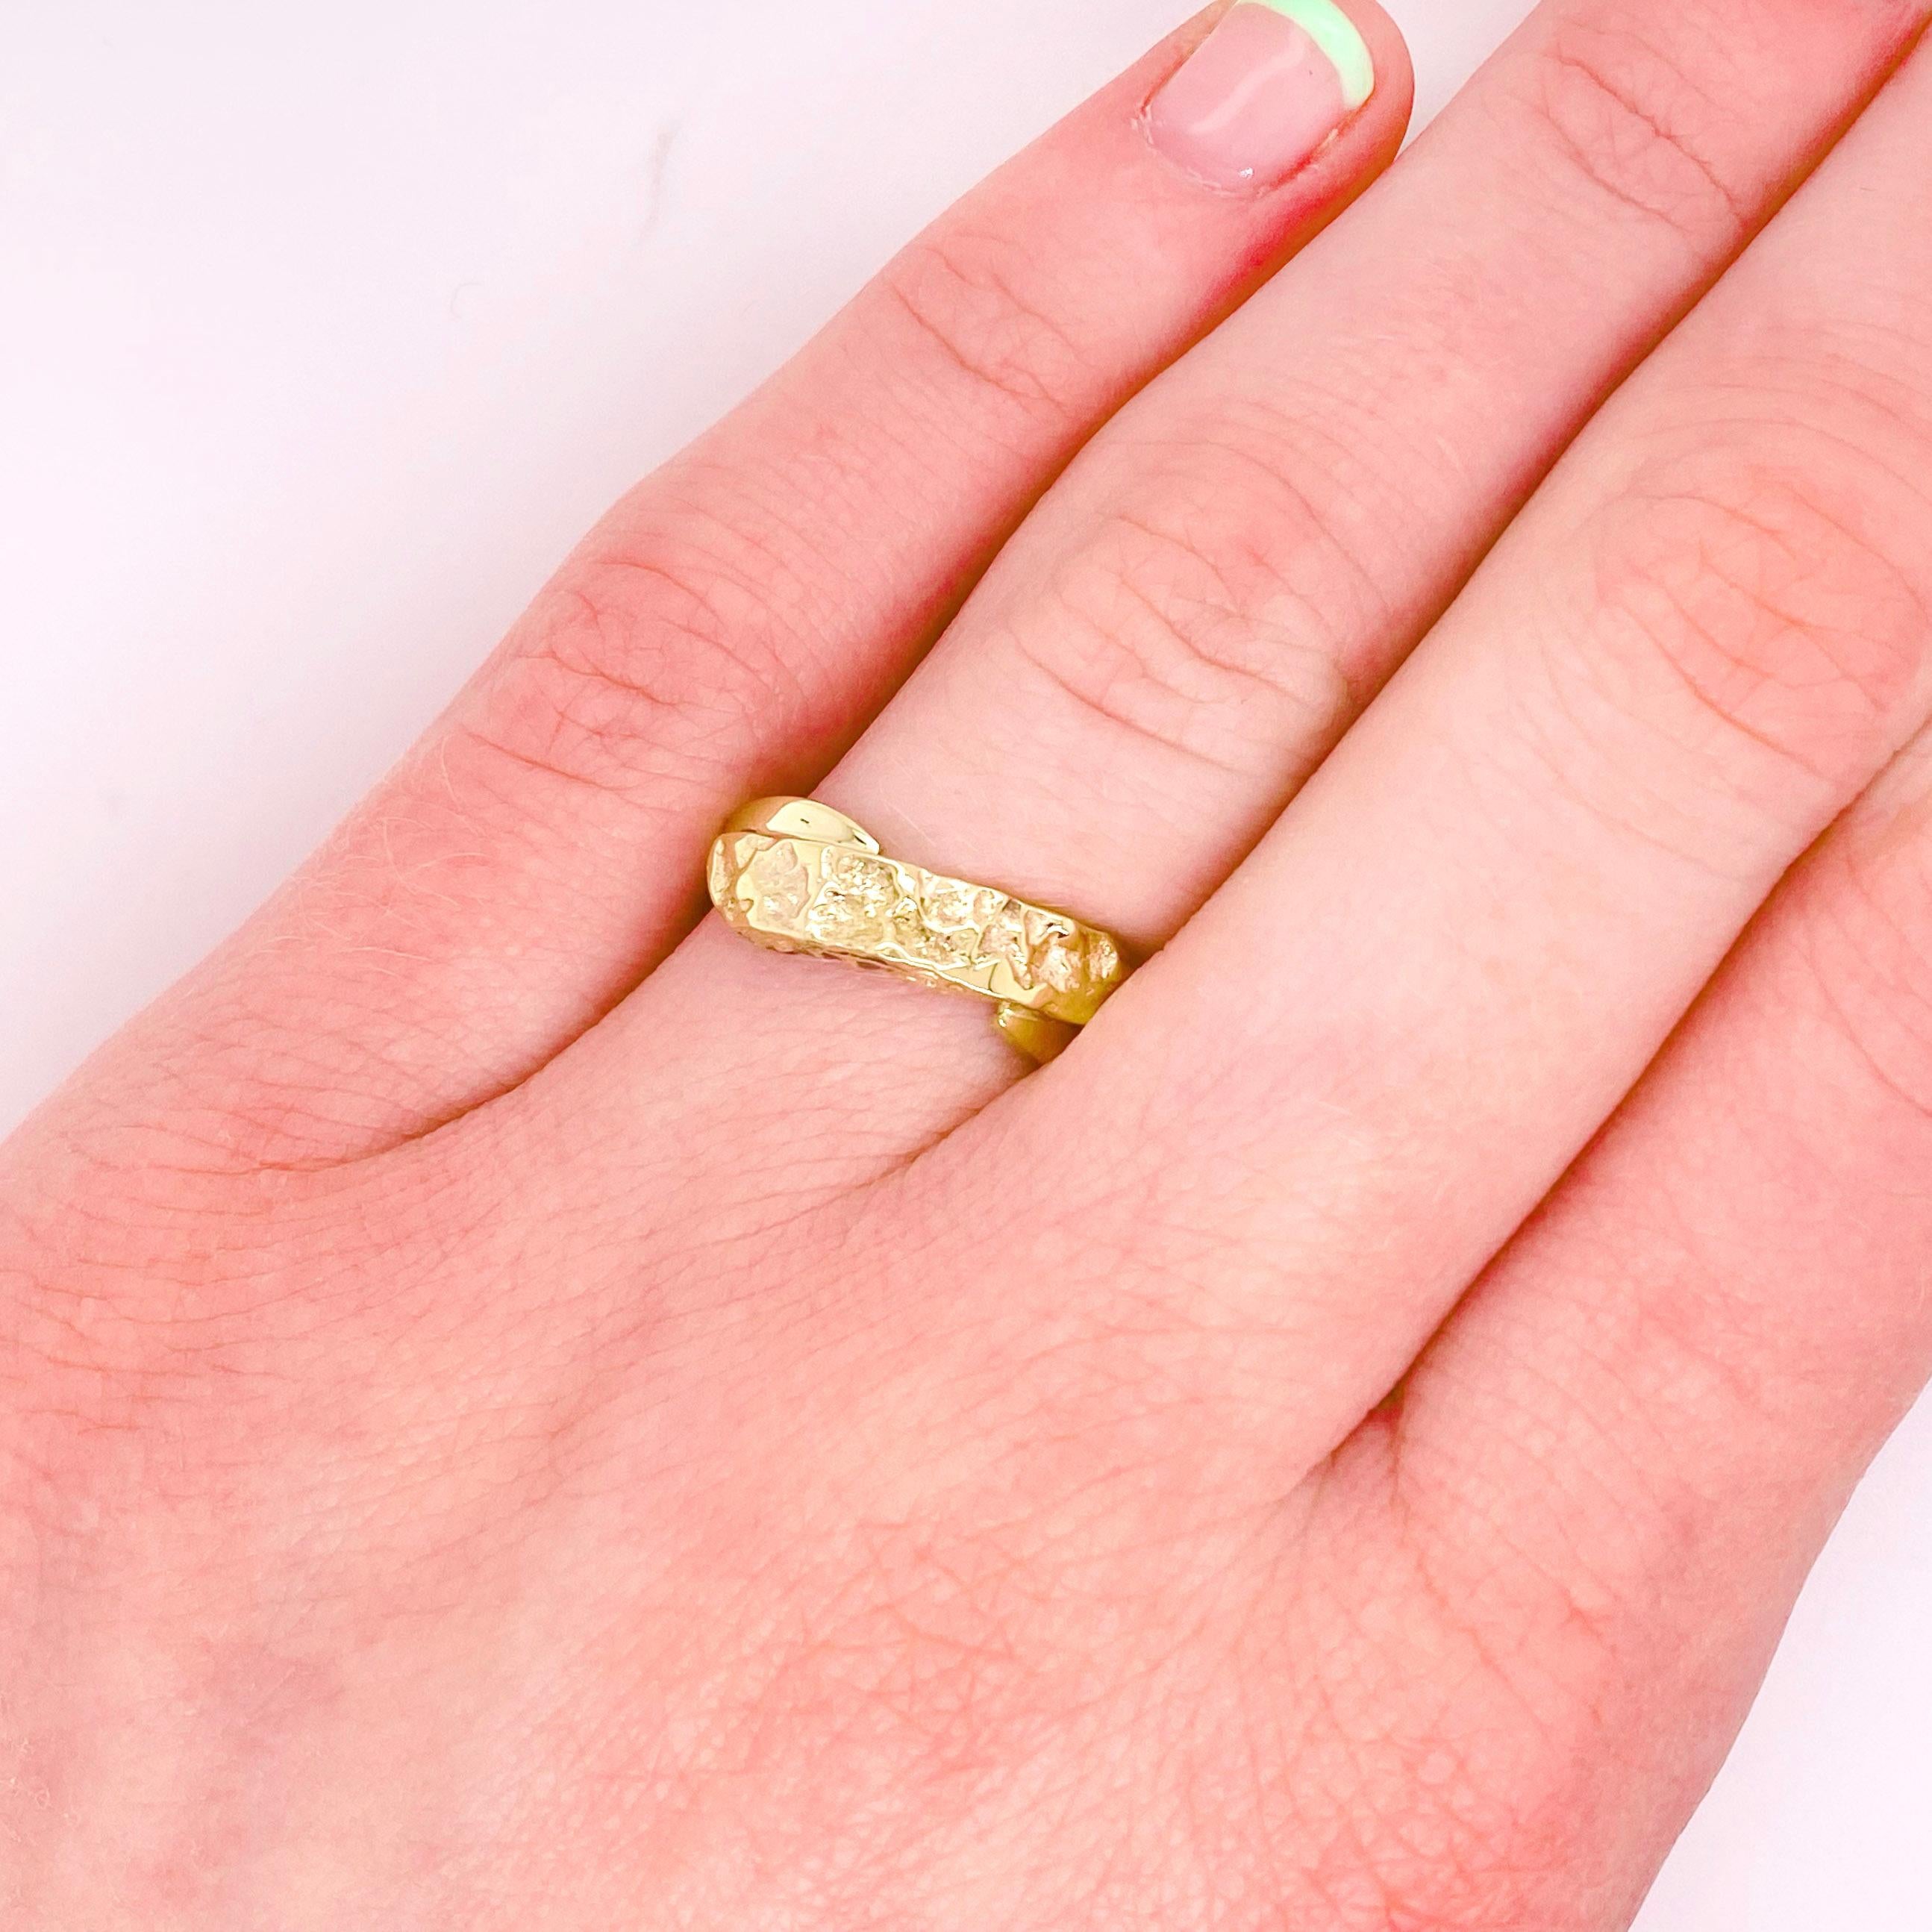 This bypass style nugget bar ring was made by our designer Mary Rupert who has been creating jewelry for over 30 years. Originally this was a nugget pendant and she recently remade it into a stylish nugget bar ring. The small V's created where the